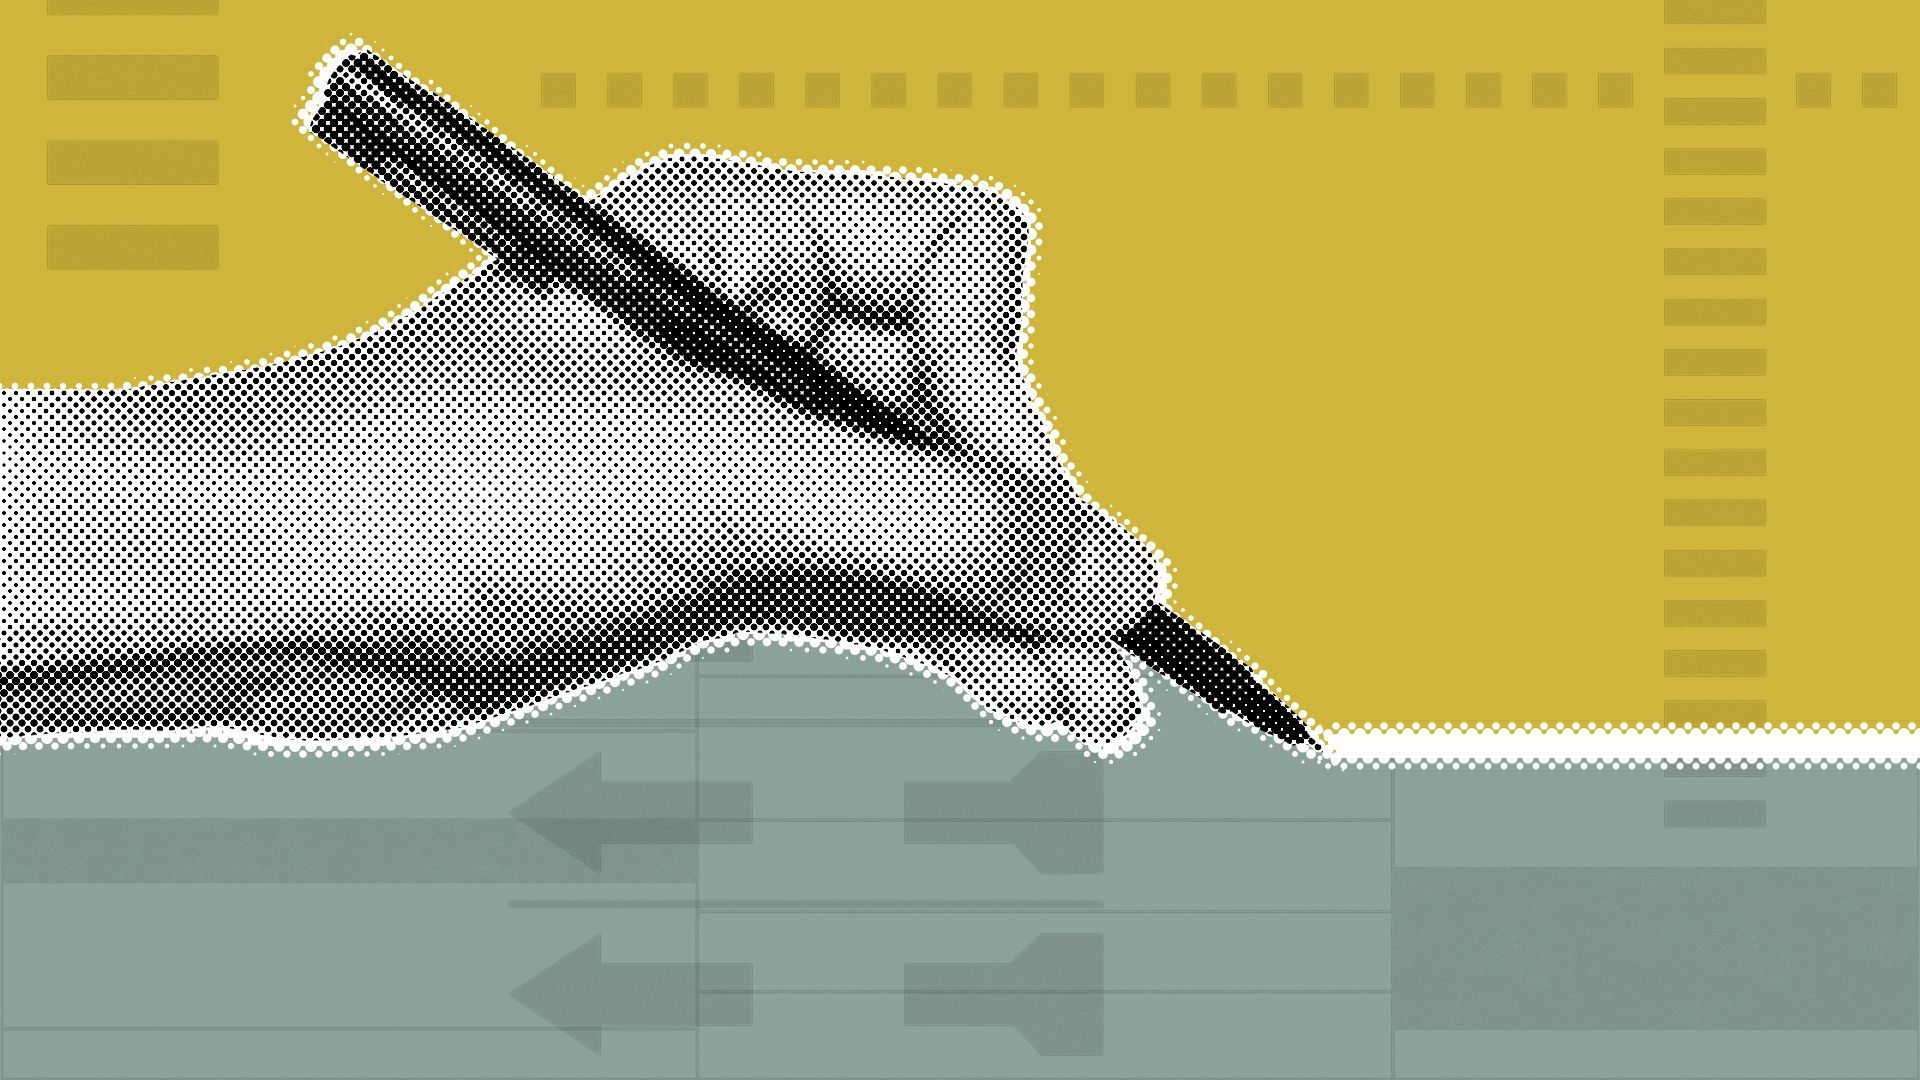 Illustration of a hand holding a pen with abstract ballot elements in the background.